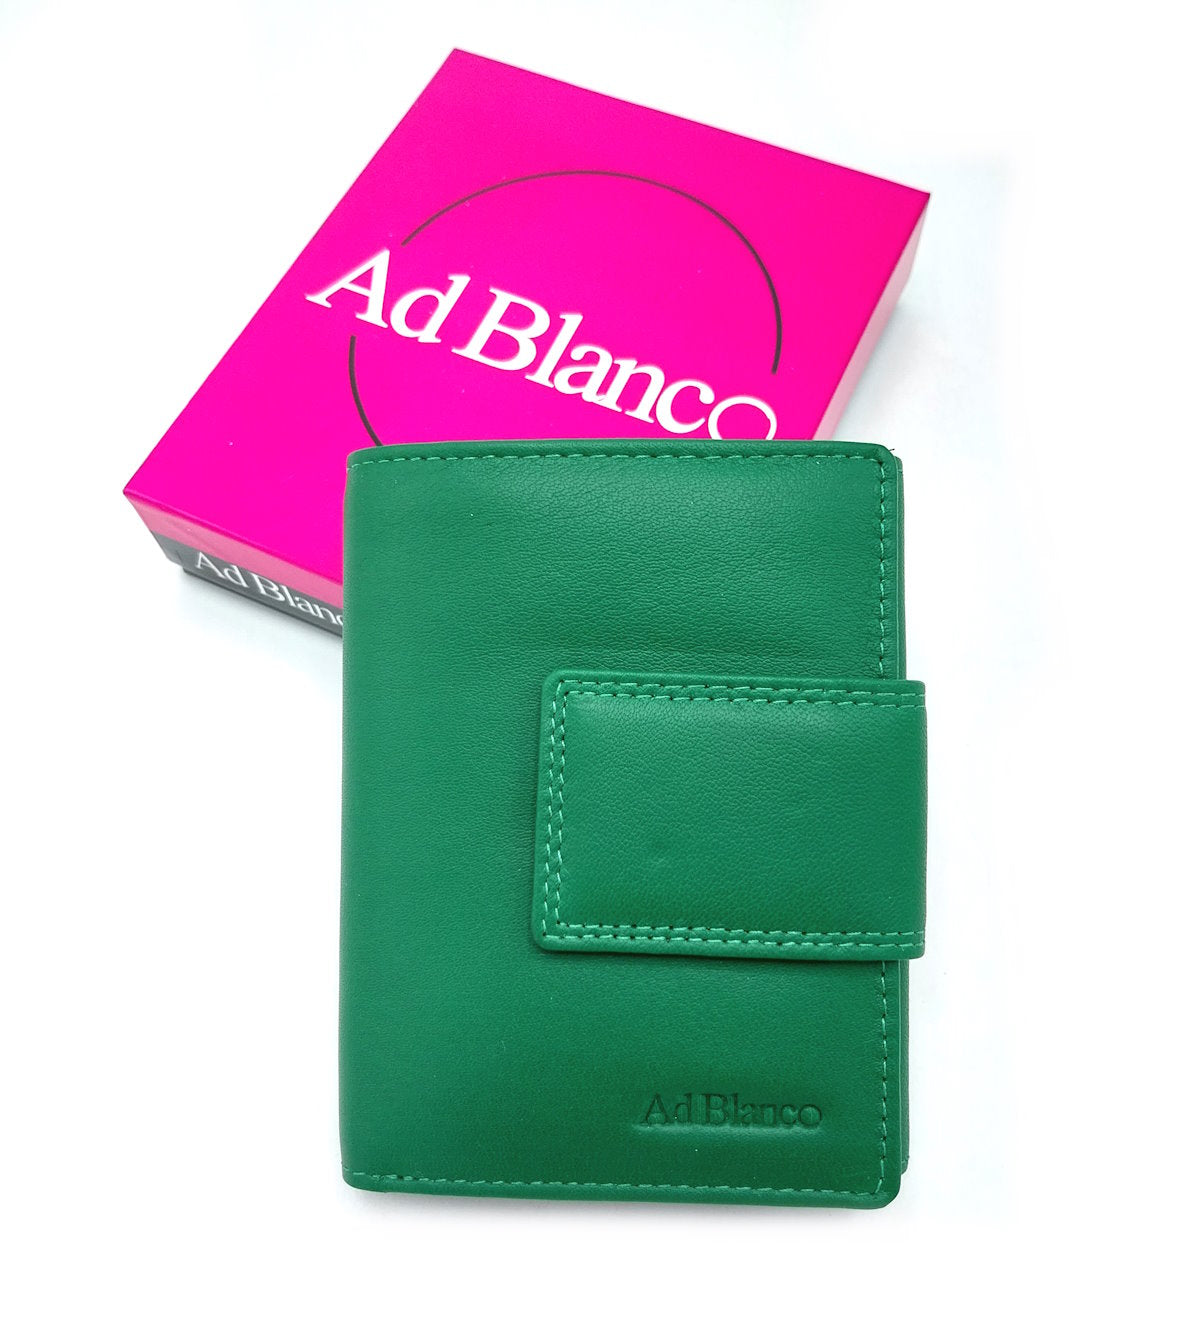 Genuine leather wallet, Ad Blanco, art. 6771.422